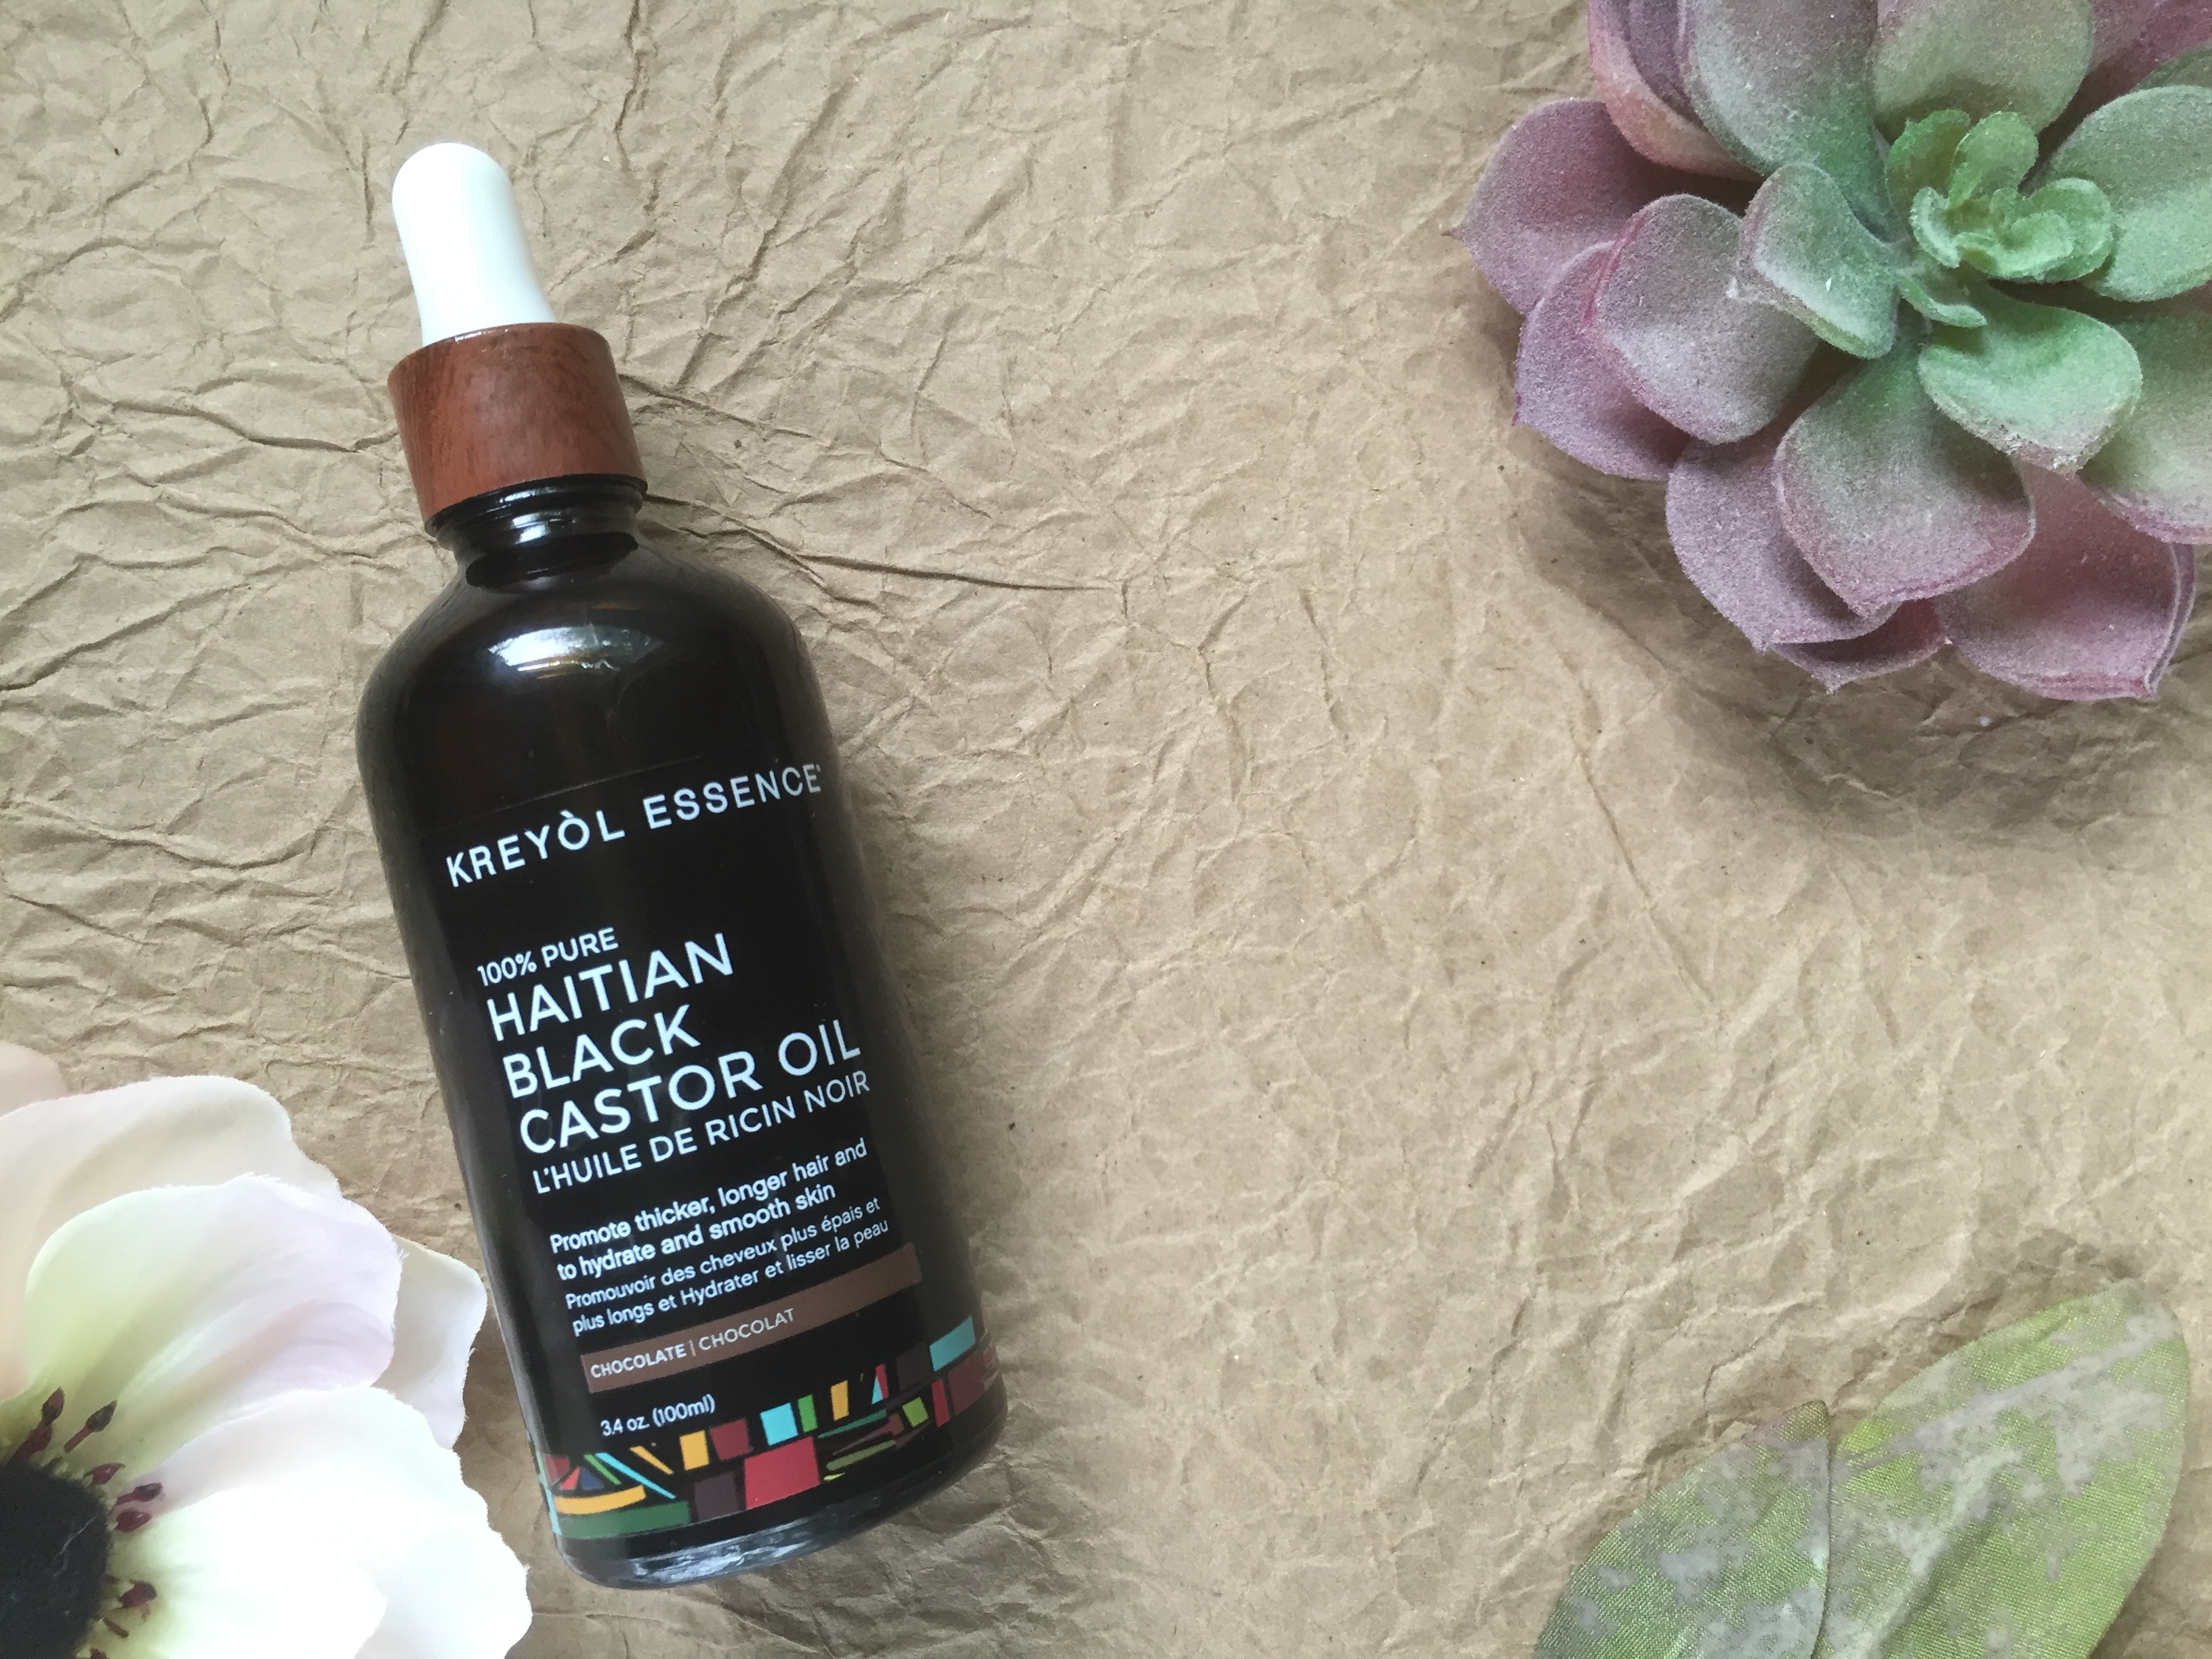 Haitian Black Castor Oil Uses and Kreyol Essence Review - Naturally You!